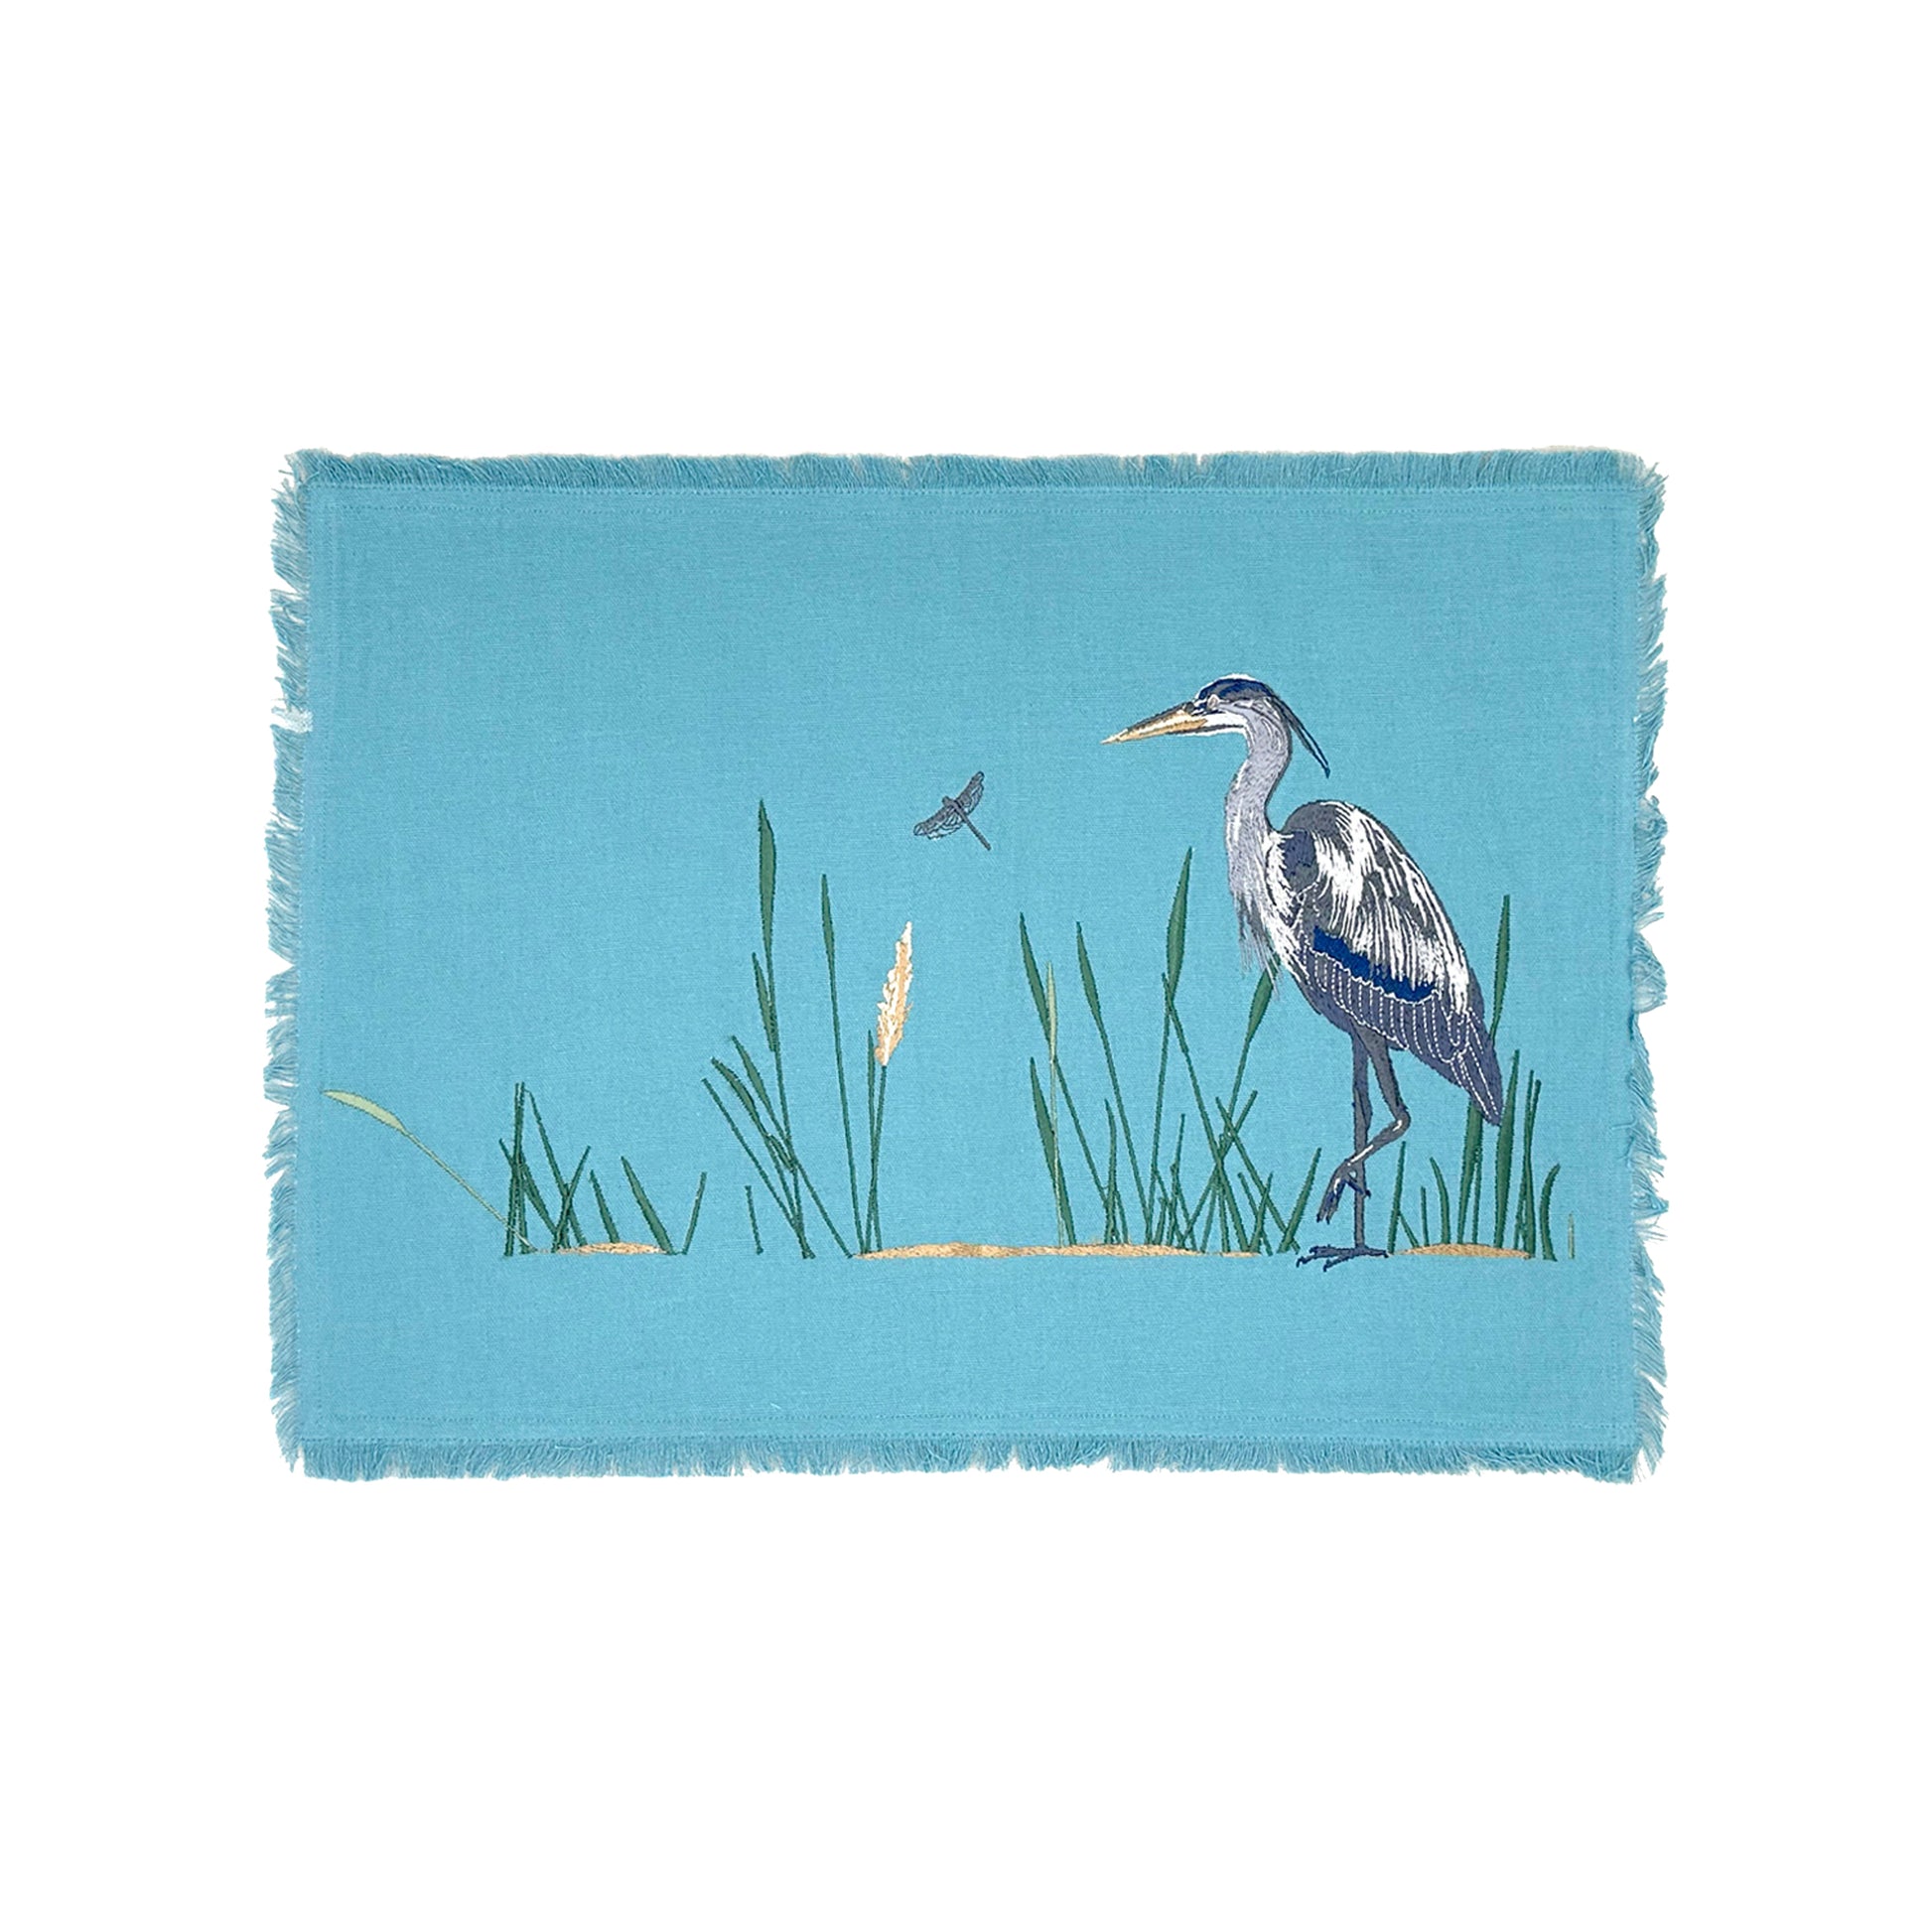 Blue Heron in the reeds with a dragon fly embroidered on blue cotton fabric with fringe edged placemat..